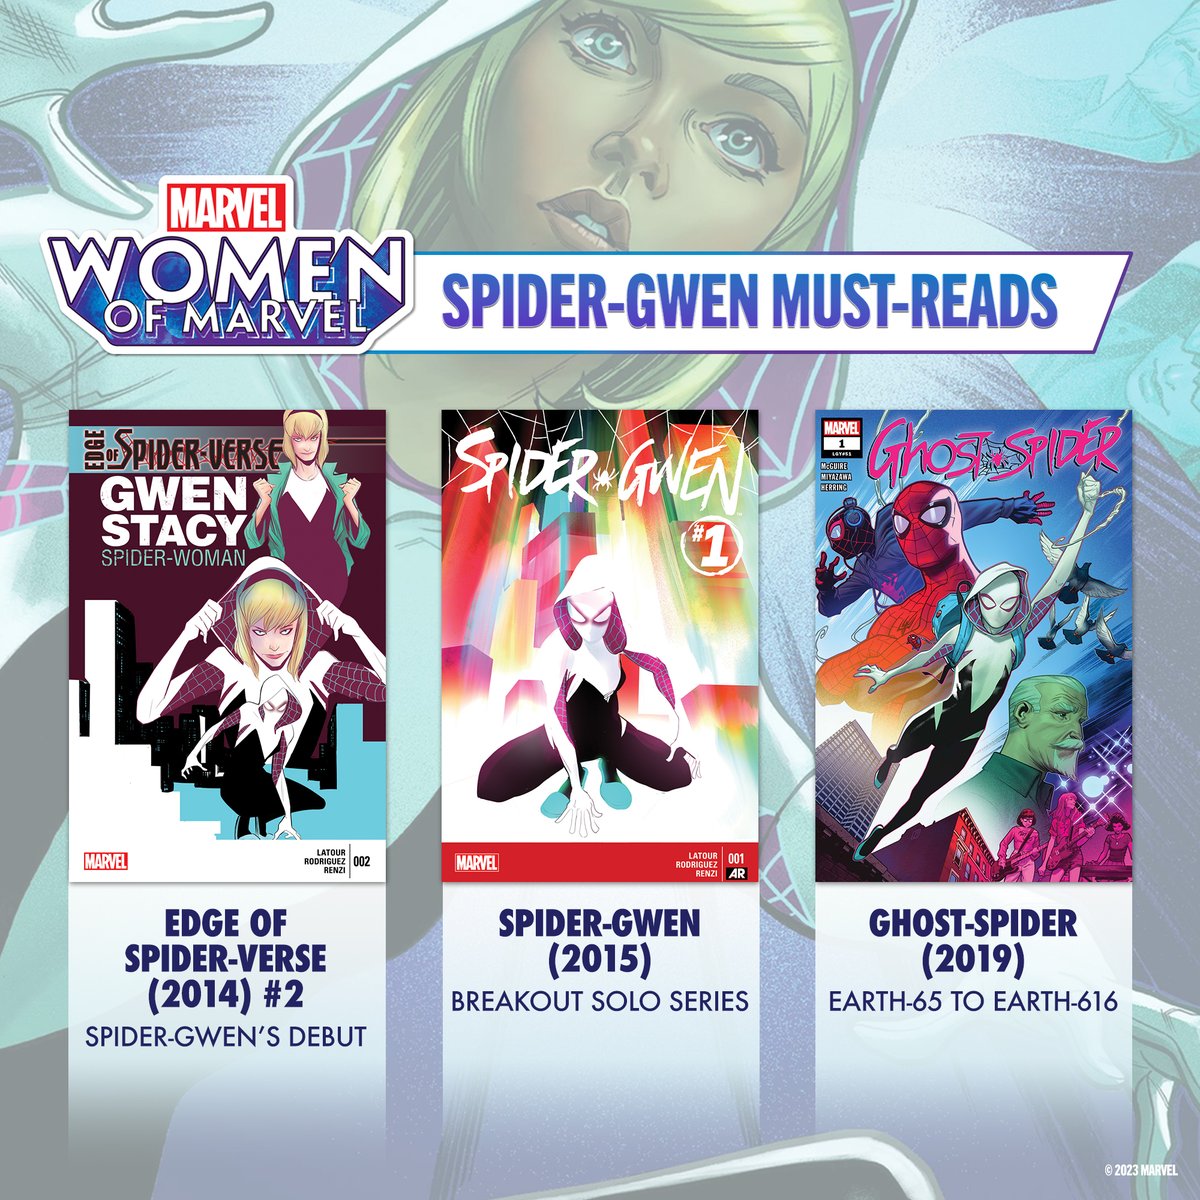 Gwen Stacy swings through her double life as Spider-Gwen! Catch a few of the hero's must-read #MarvelComics on the @MarvelUnlimited app and then travel to Earth-65 and learn all about Ghost-Spider on the latest #WomenOfMarvel podcast episode: marvel.com/womenofmarvel 🎧